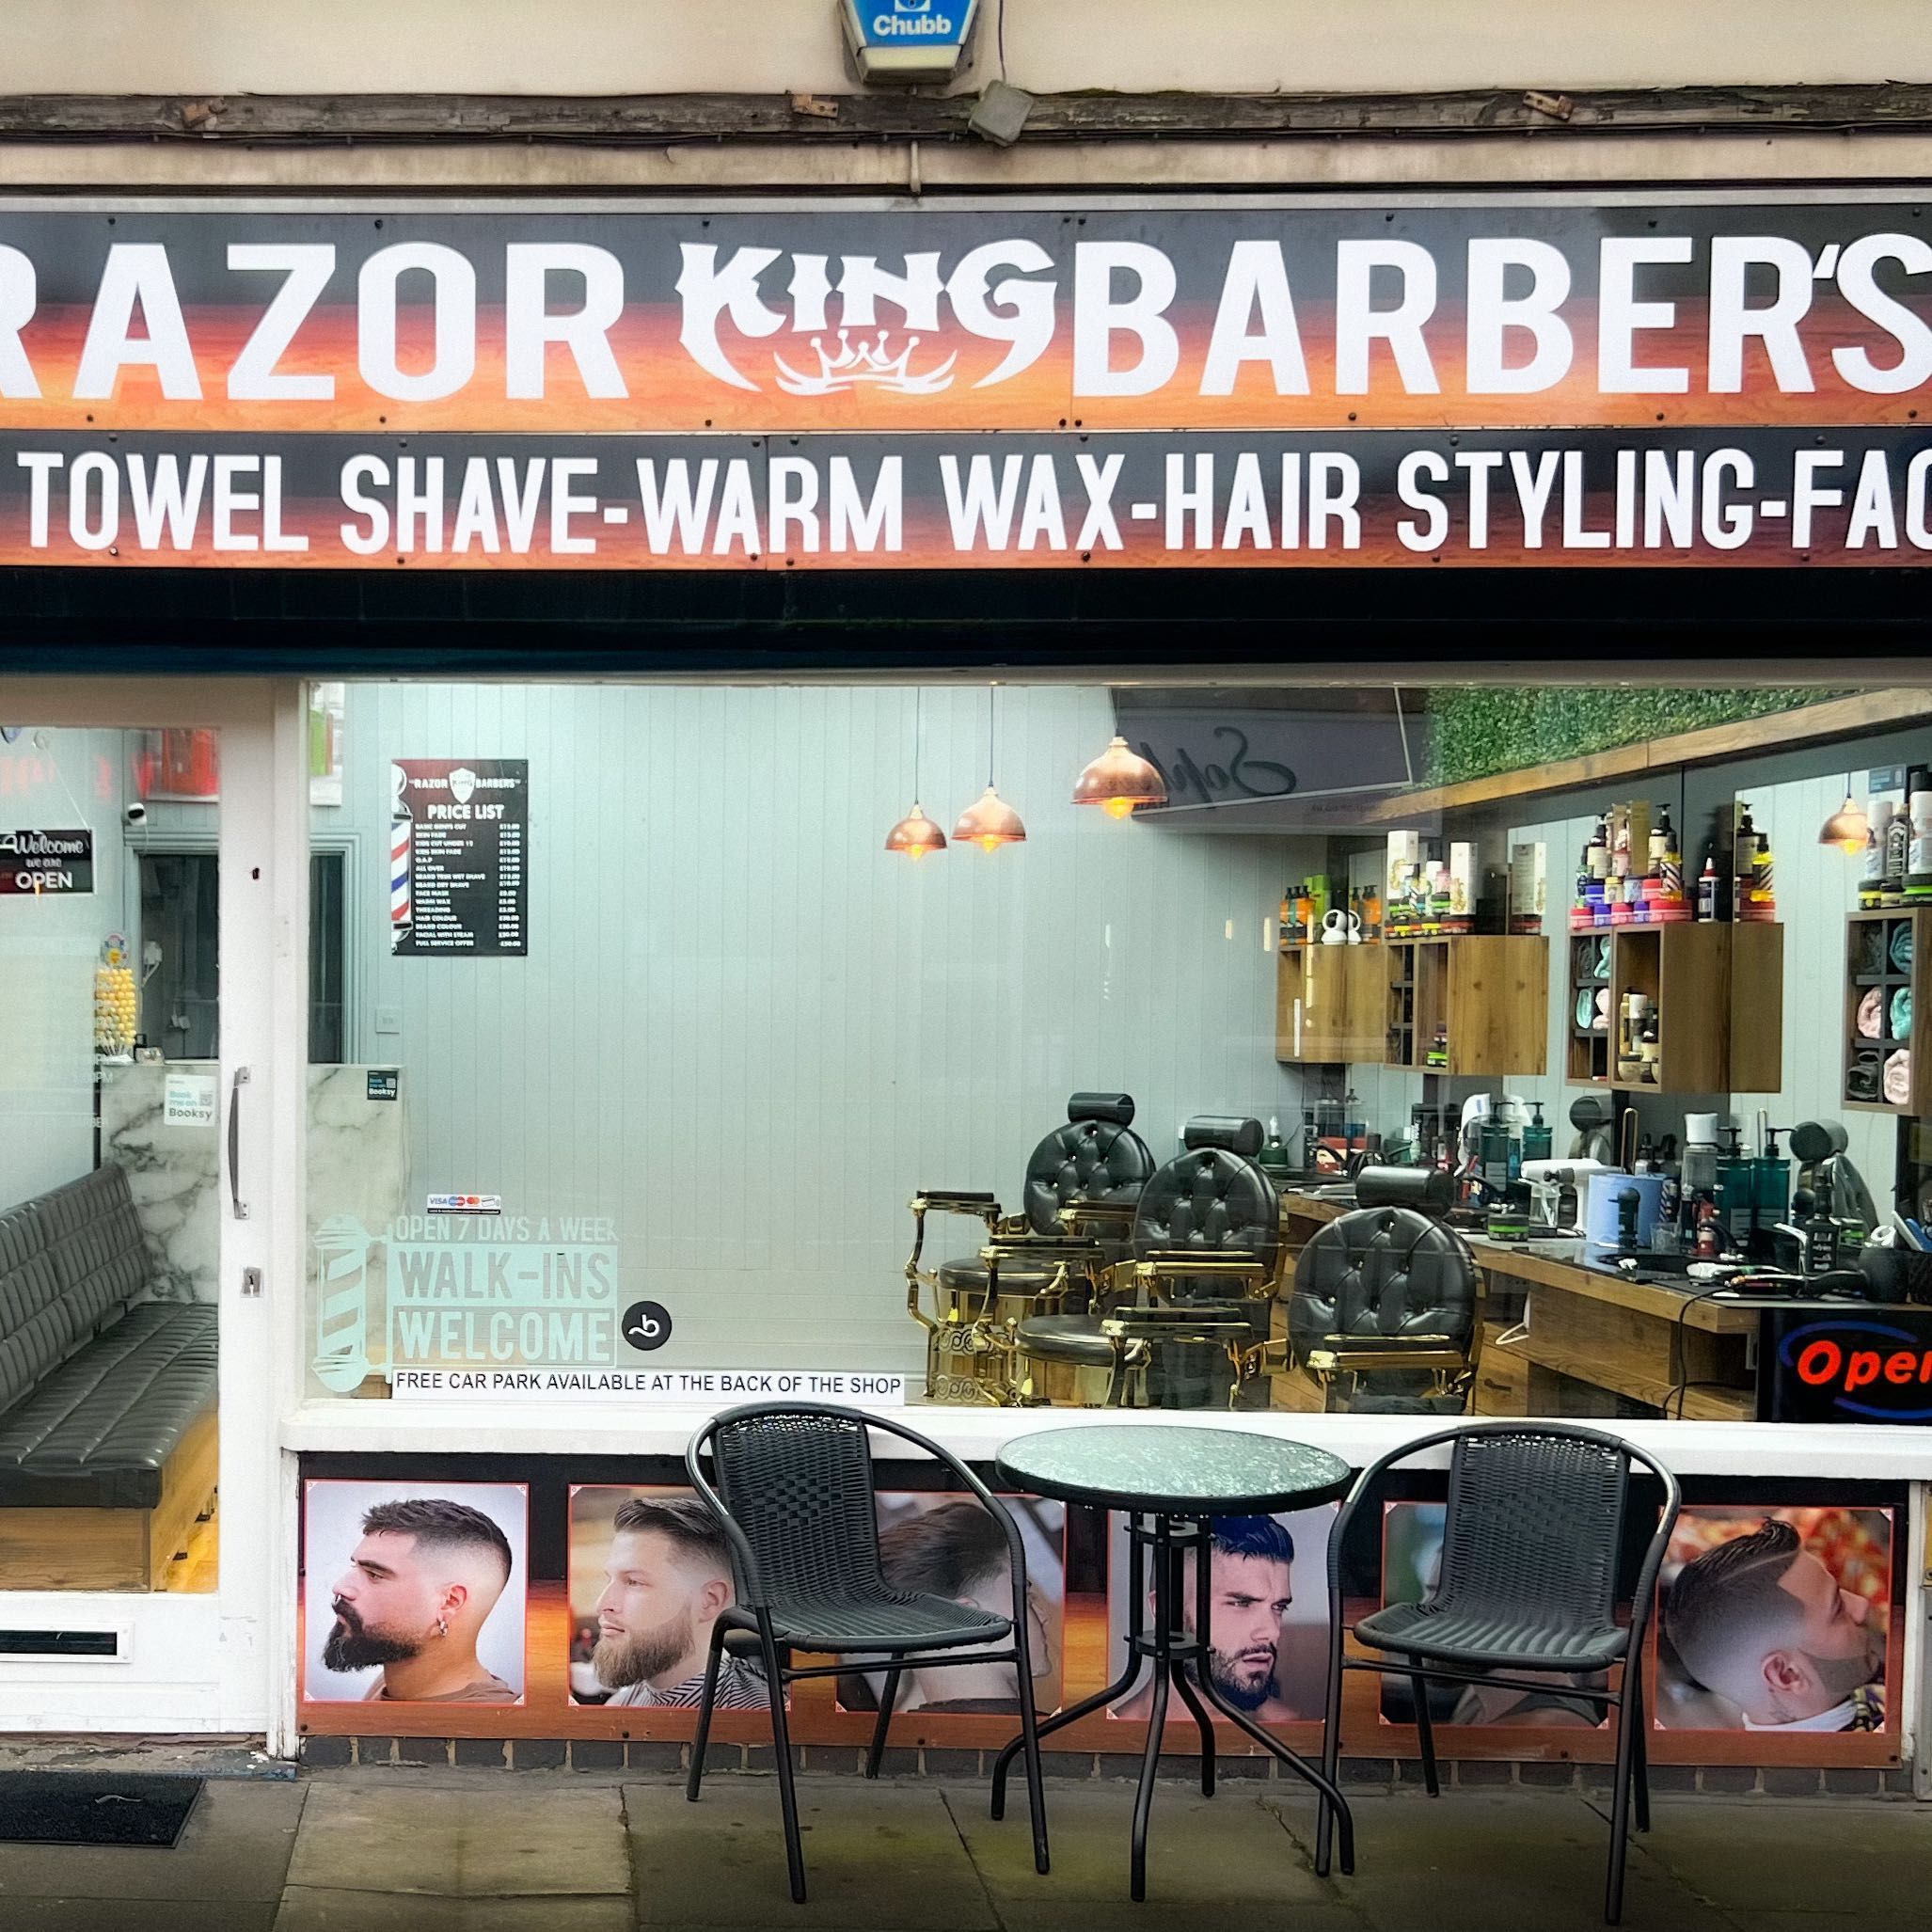 Razor king barbers, Leicester Road, 33 Leicester Road, LE18 1NR, Wigston